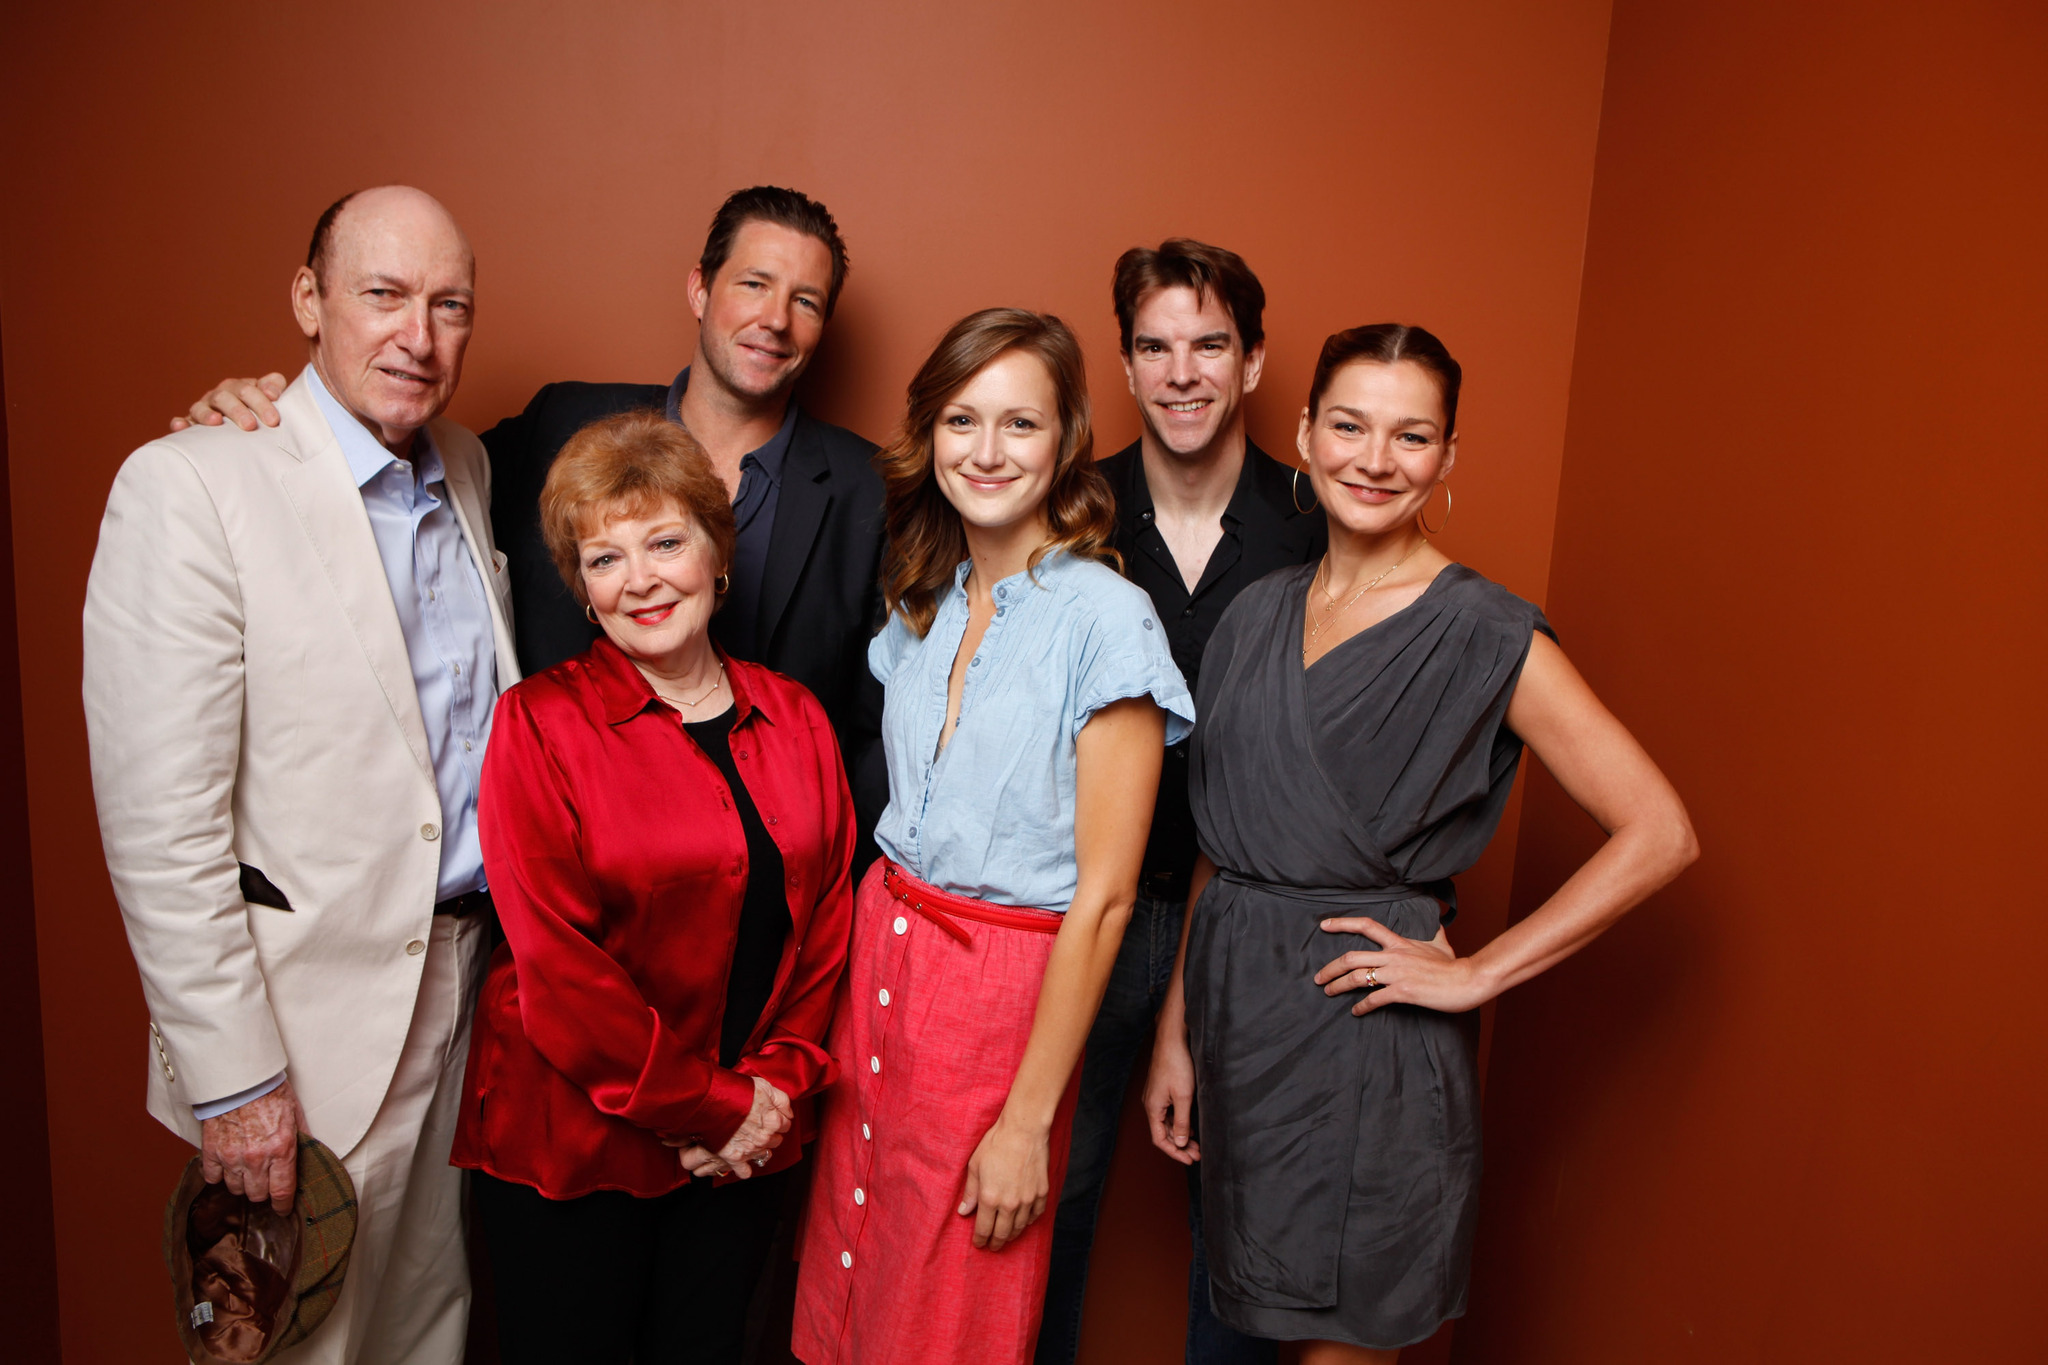 Edward Burns, Heather Burns, Anita Gillette, Ed Lauter, Michael McGlone and Kerry Bishé at event of The Fitzgerald Family Christmas (2012)